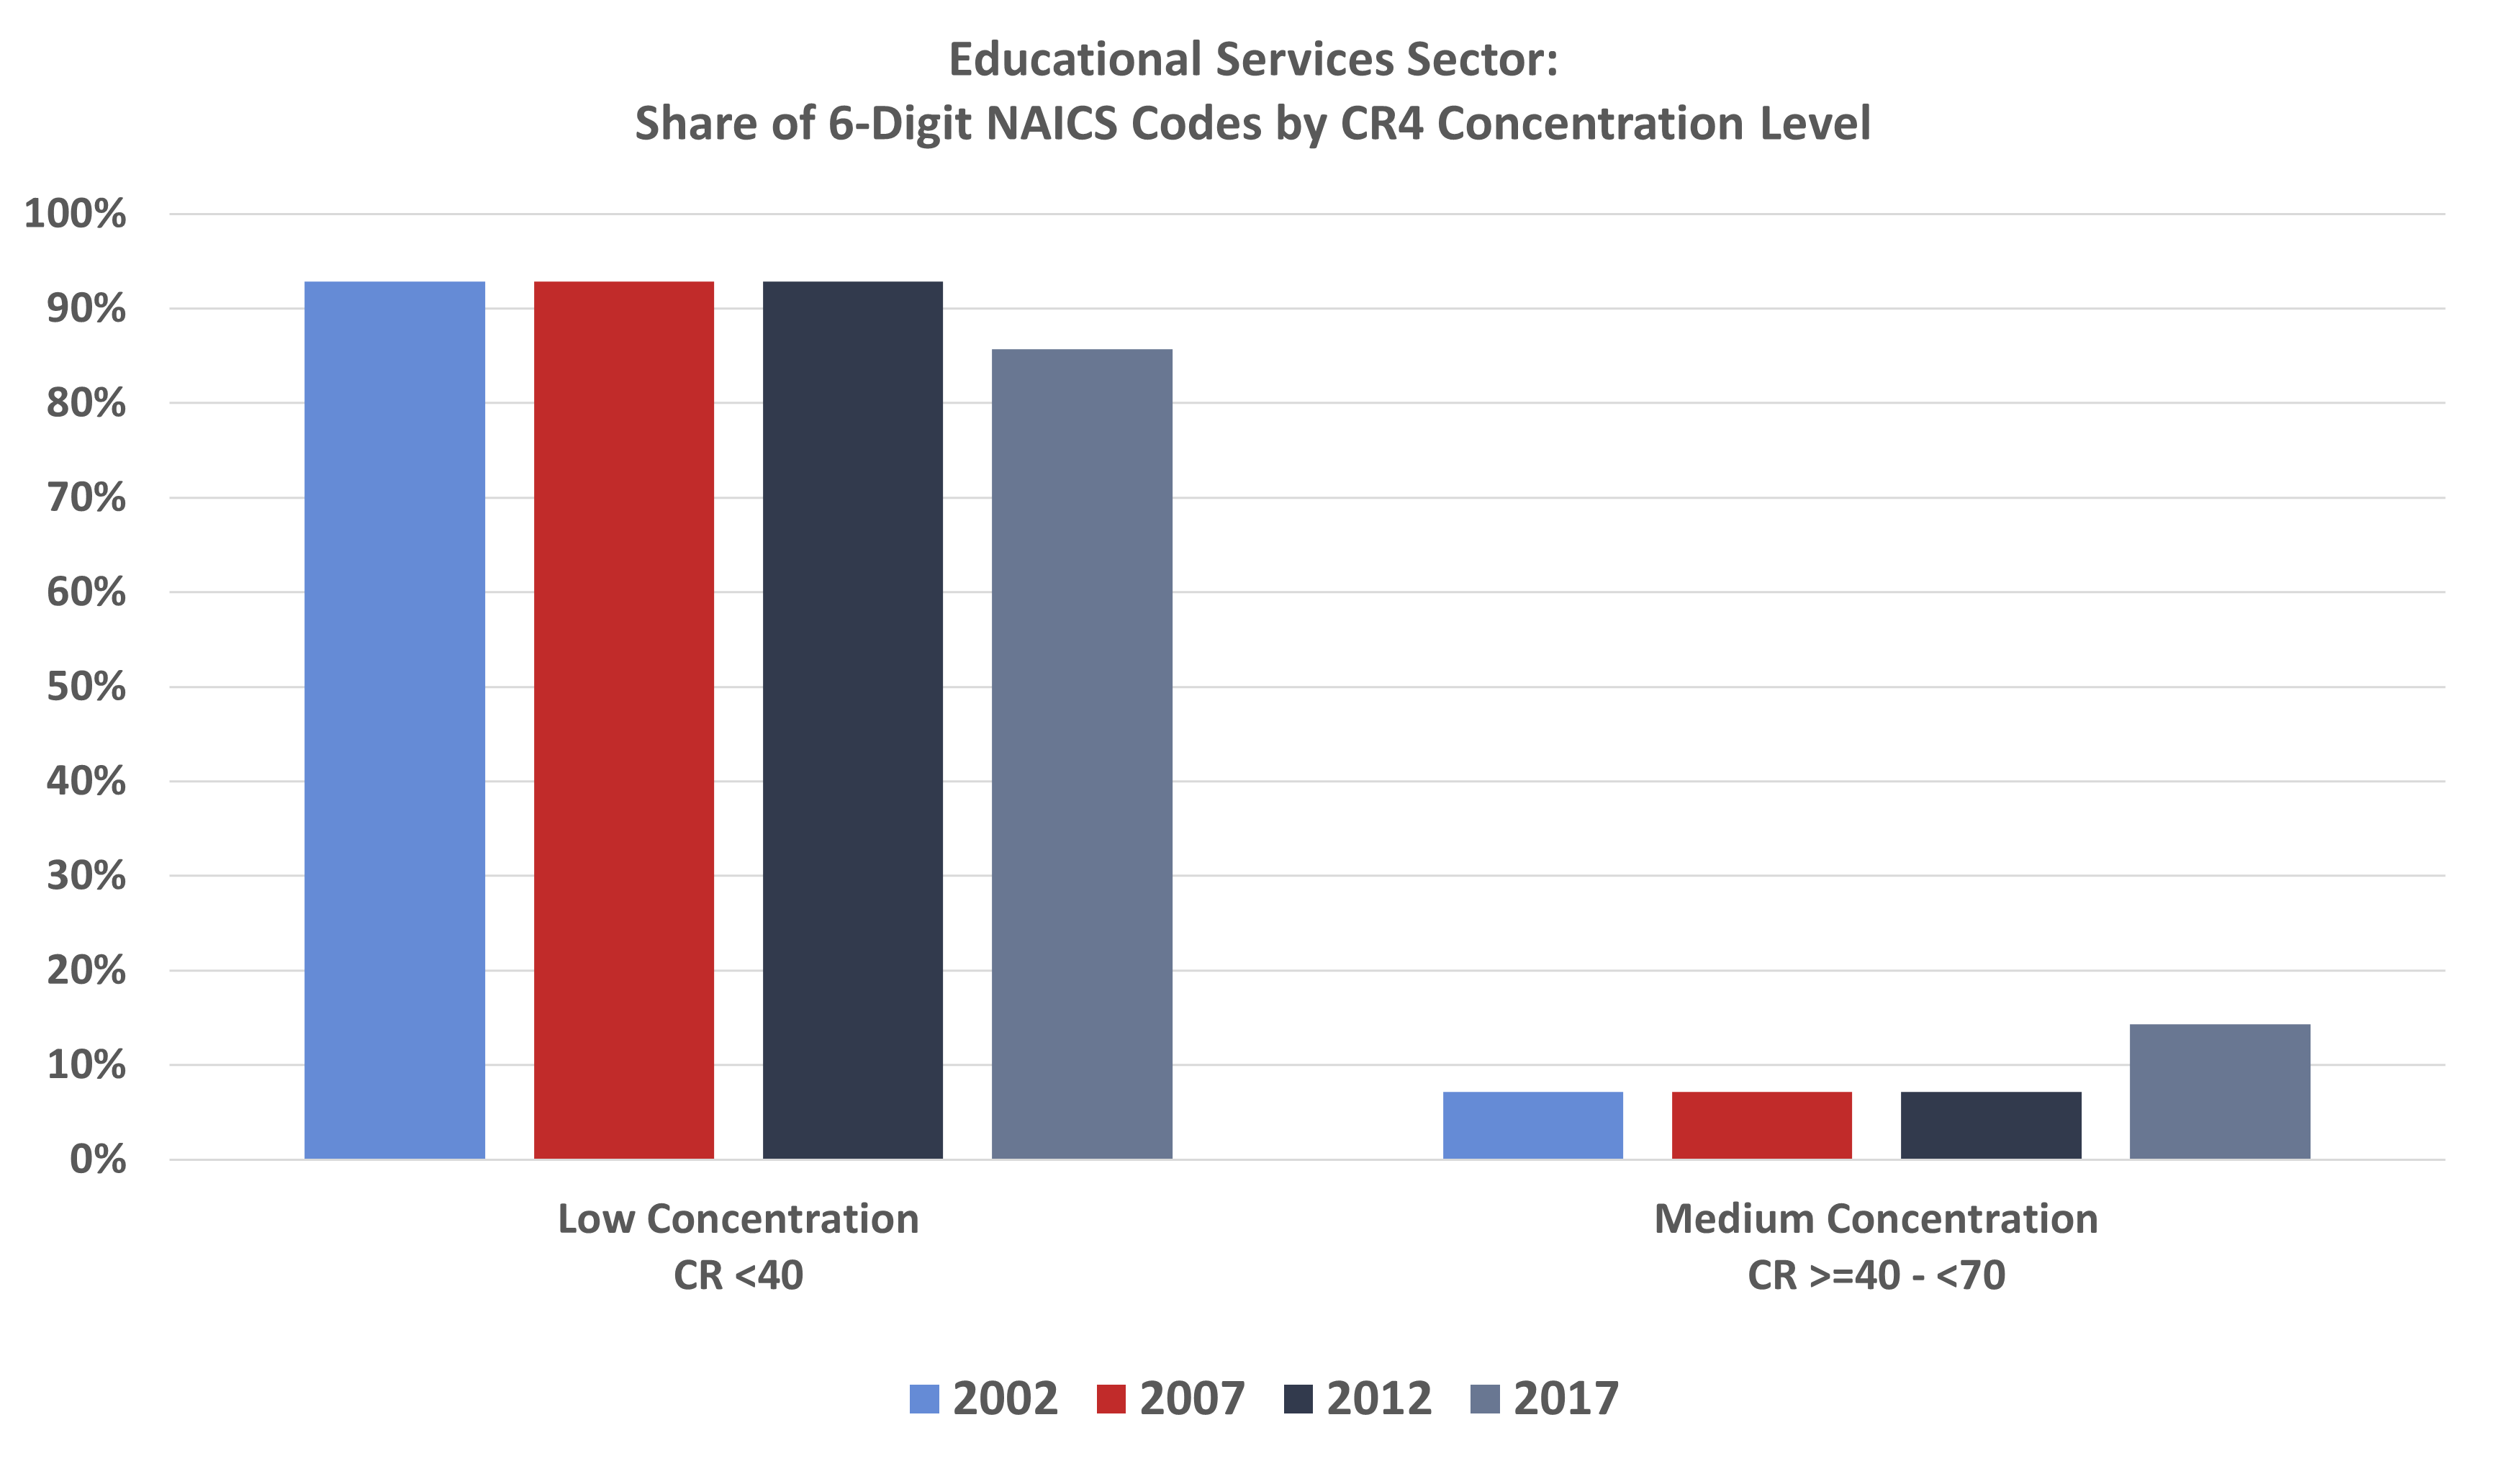 Educational Services Sector: Share of 6-Digit NAICS Codes by CR4 Concentration Level